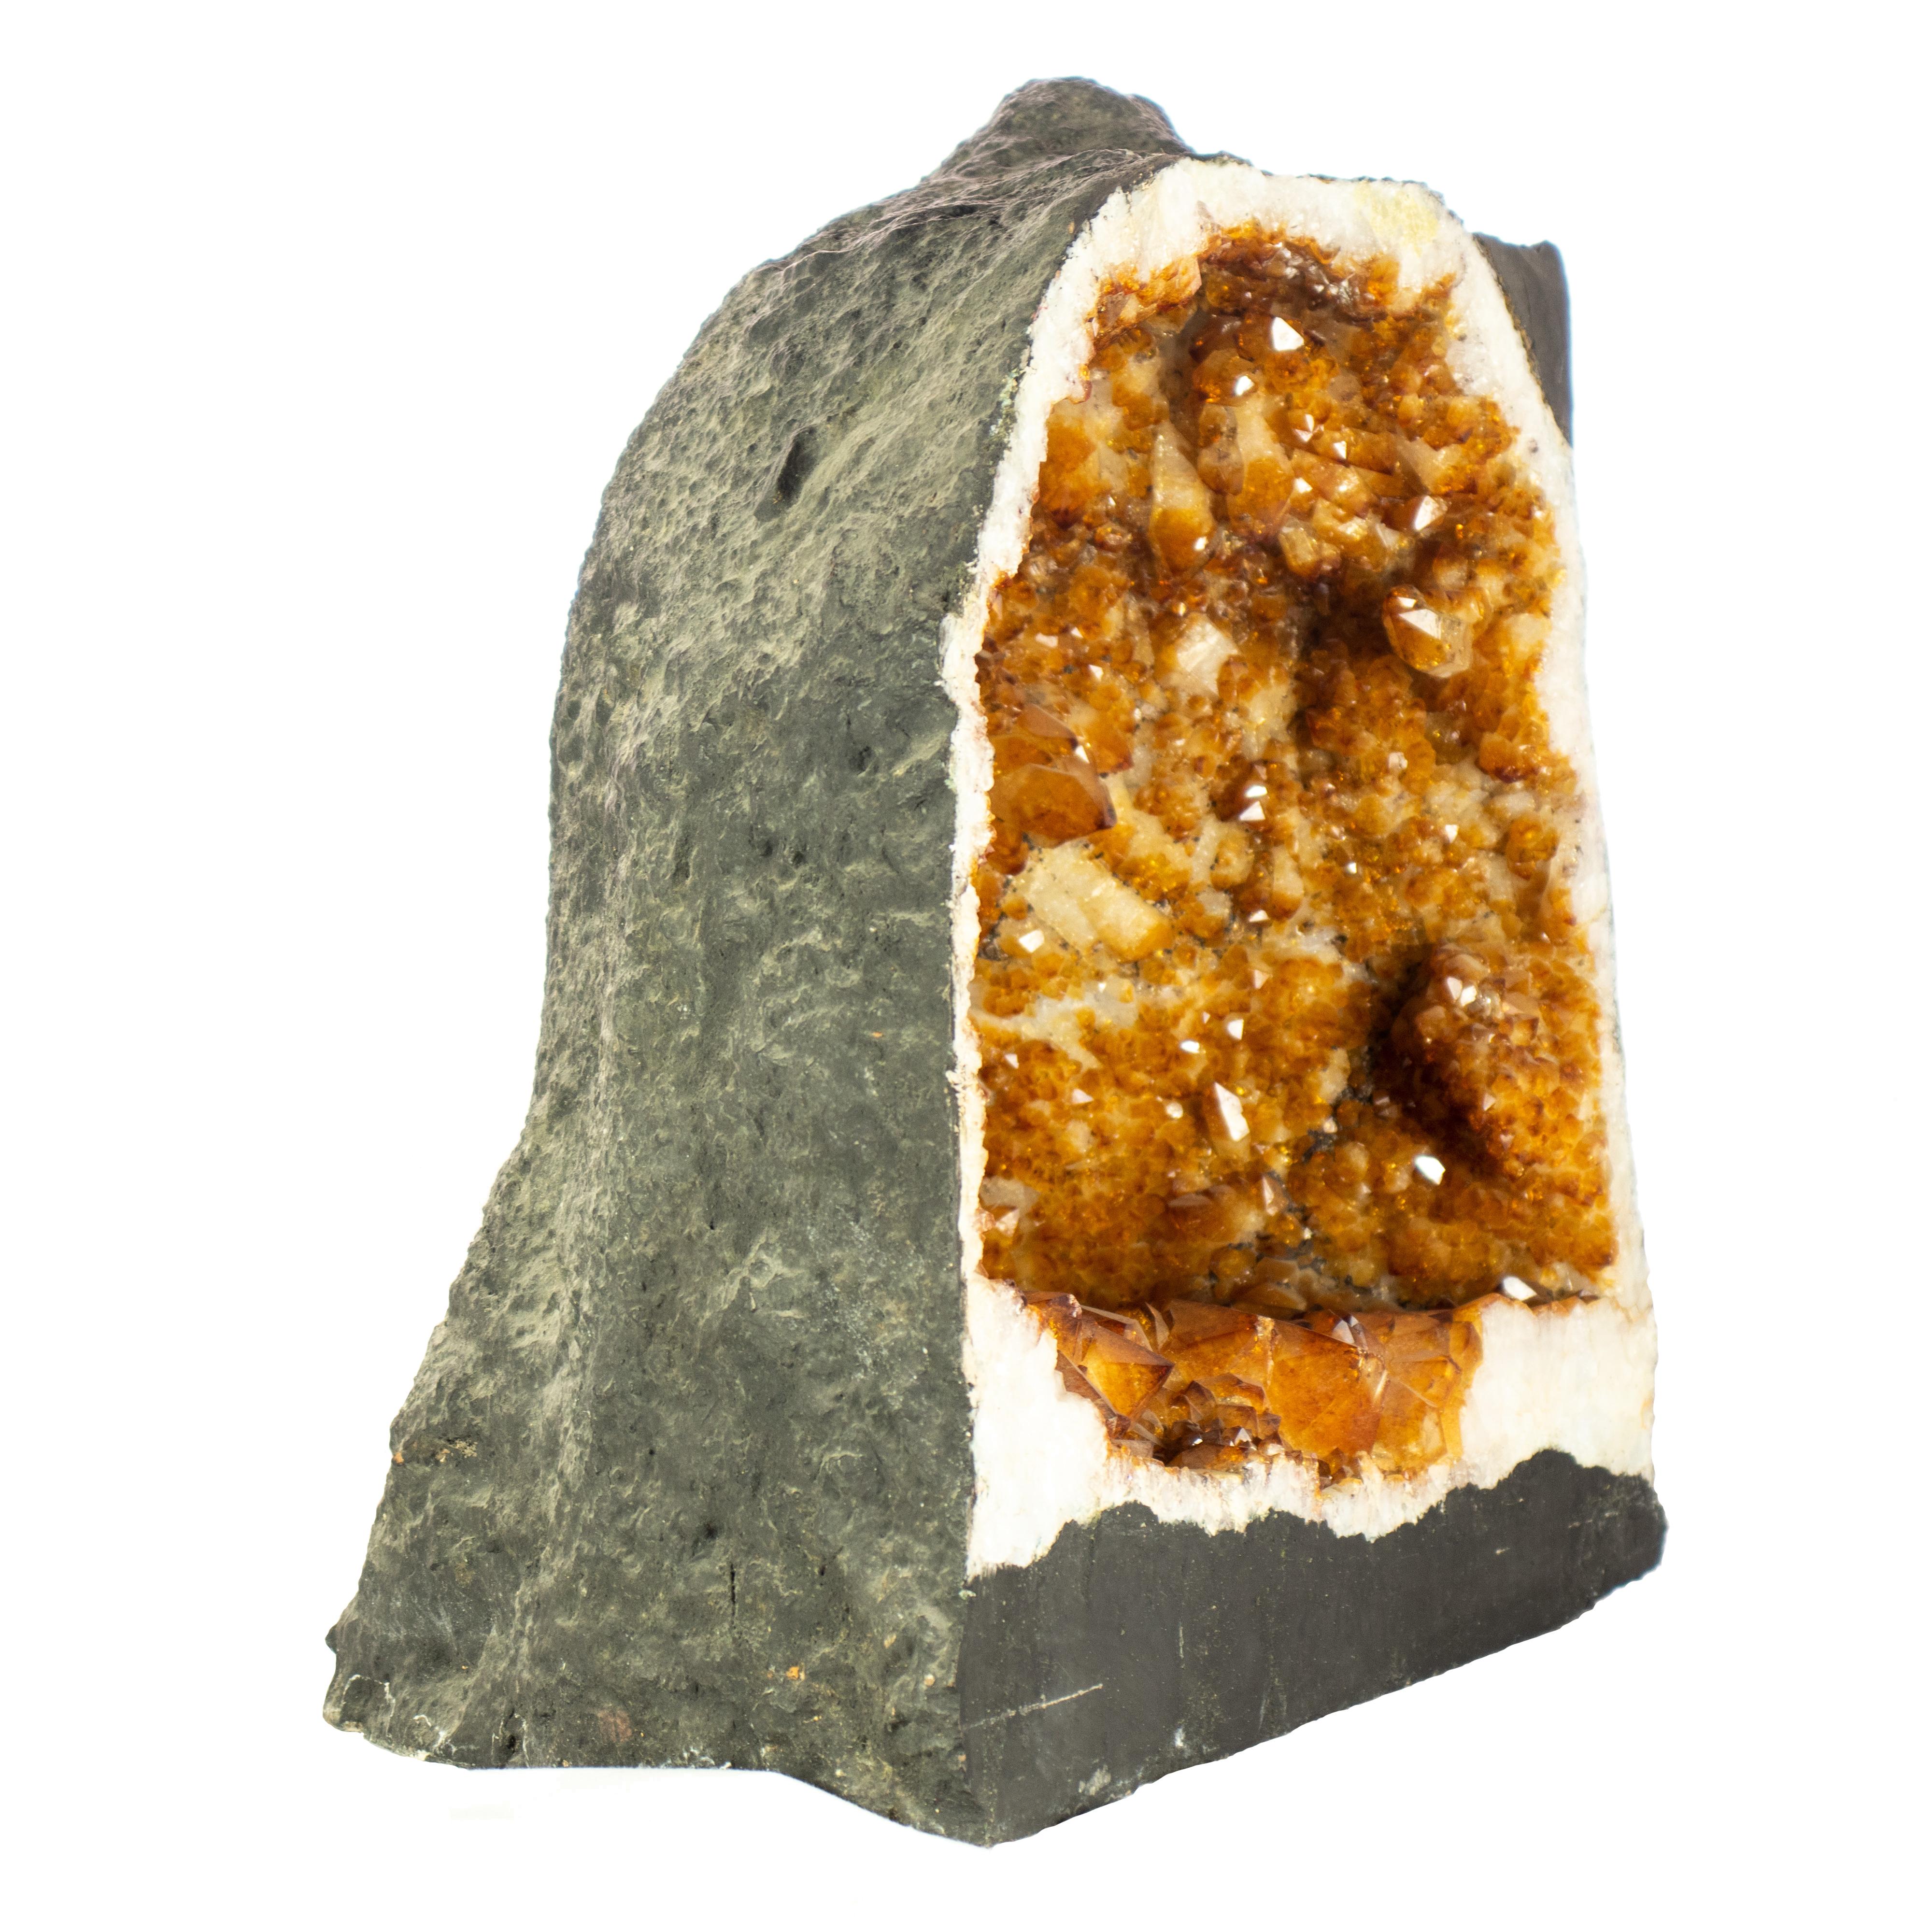 Delightful mineral sculpture, a beautiful Citrine Quartz Clusters from Uruguay. Wonderful crystals and stunning formations that will serve as a decorative ornament or sculpture at your home. Great to use in grids, for meditation or to infuse your